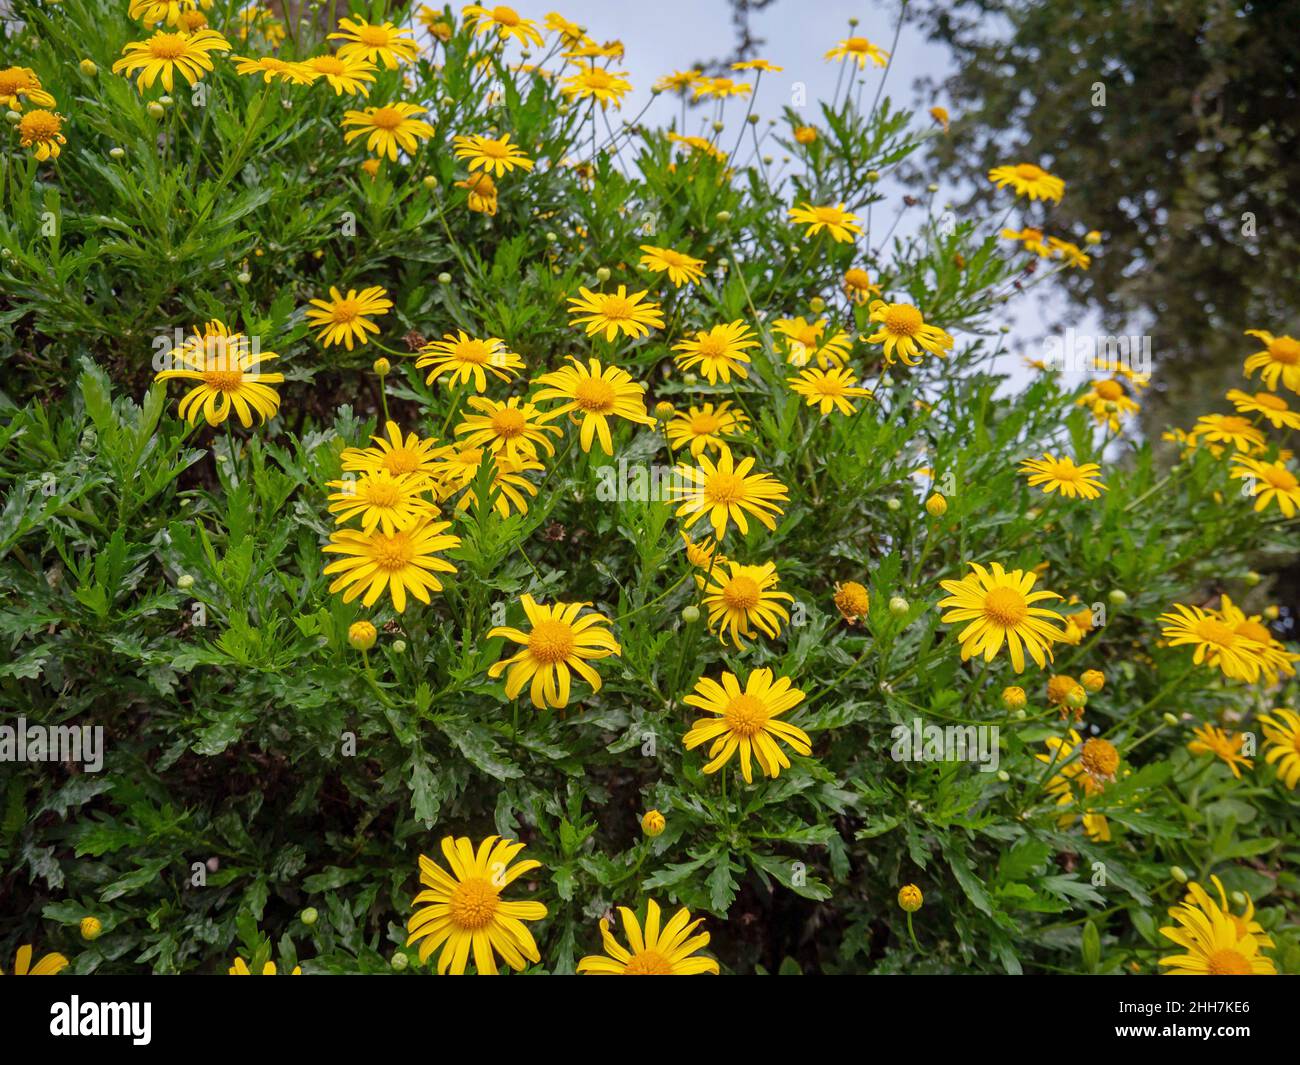 African bush daisy or bull's-eye or Euryops chrysanthemoides plant with bright yellow daisy flowers and lush green foliage. Stock Photo